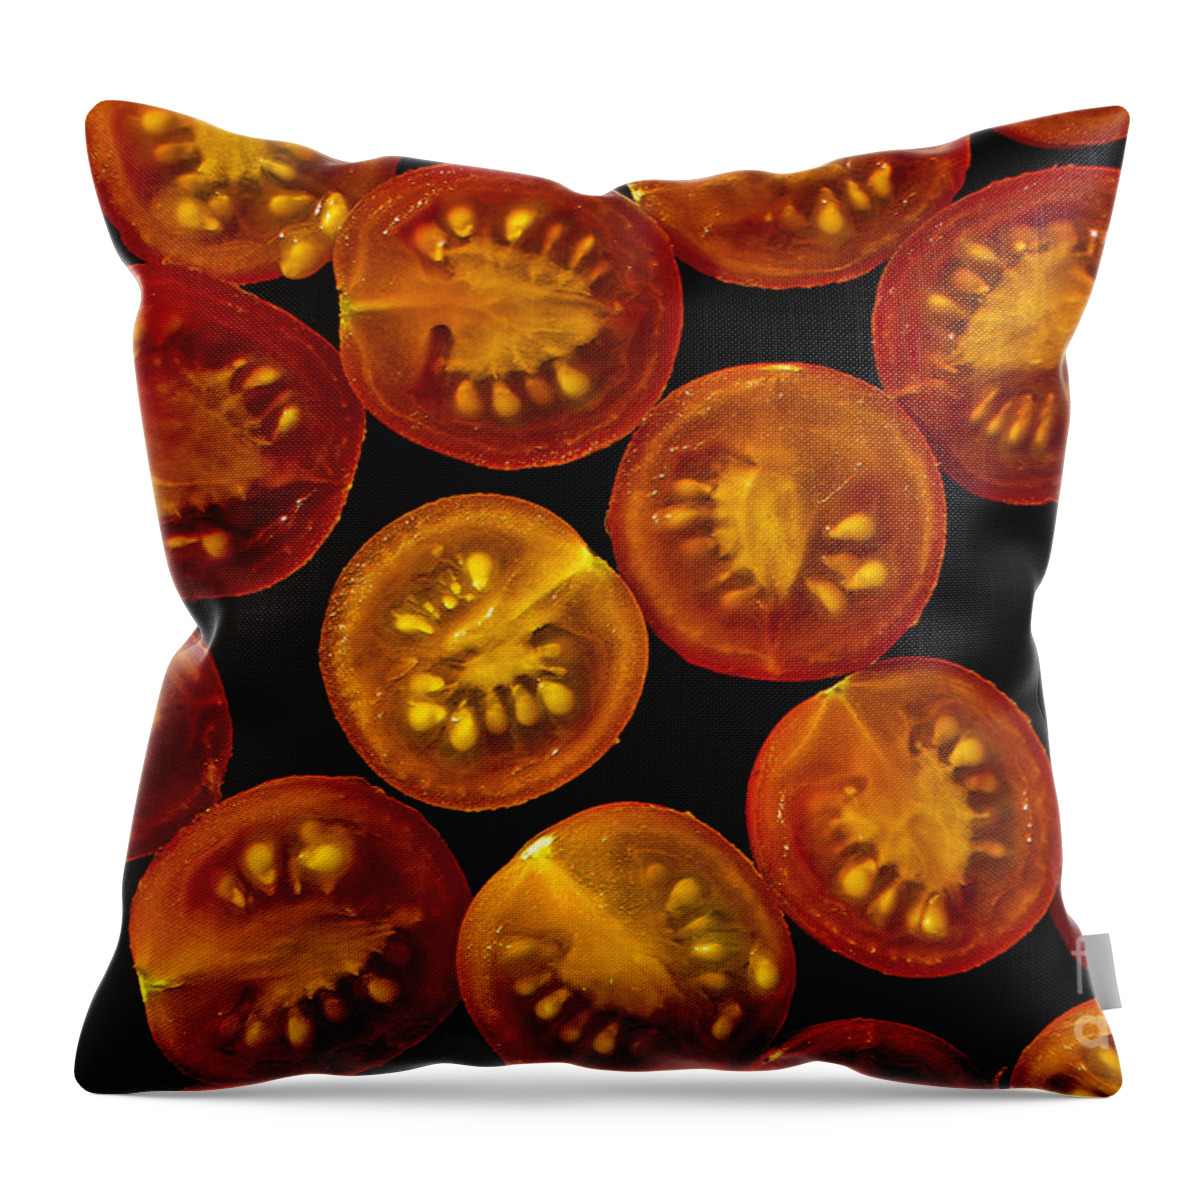 Devined Throw Pillow featuring the photograph Devined by Sandi Mikuse